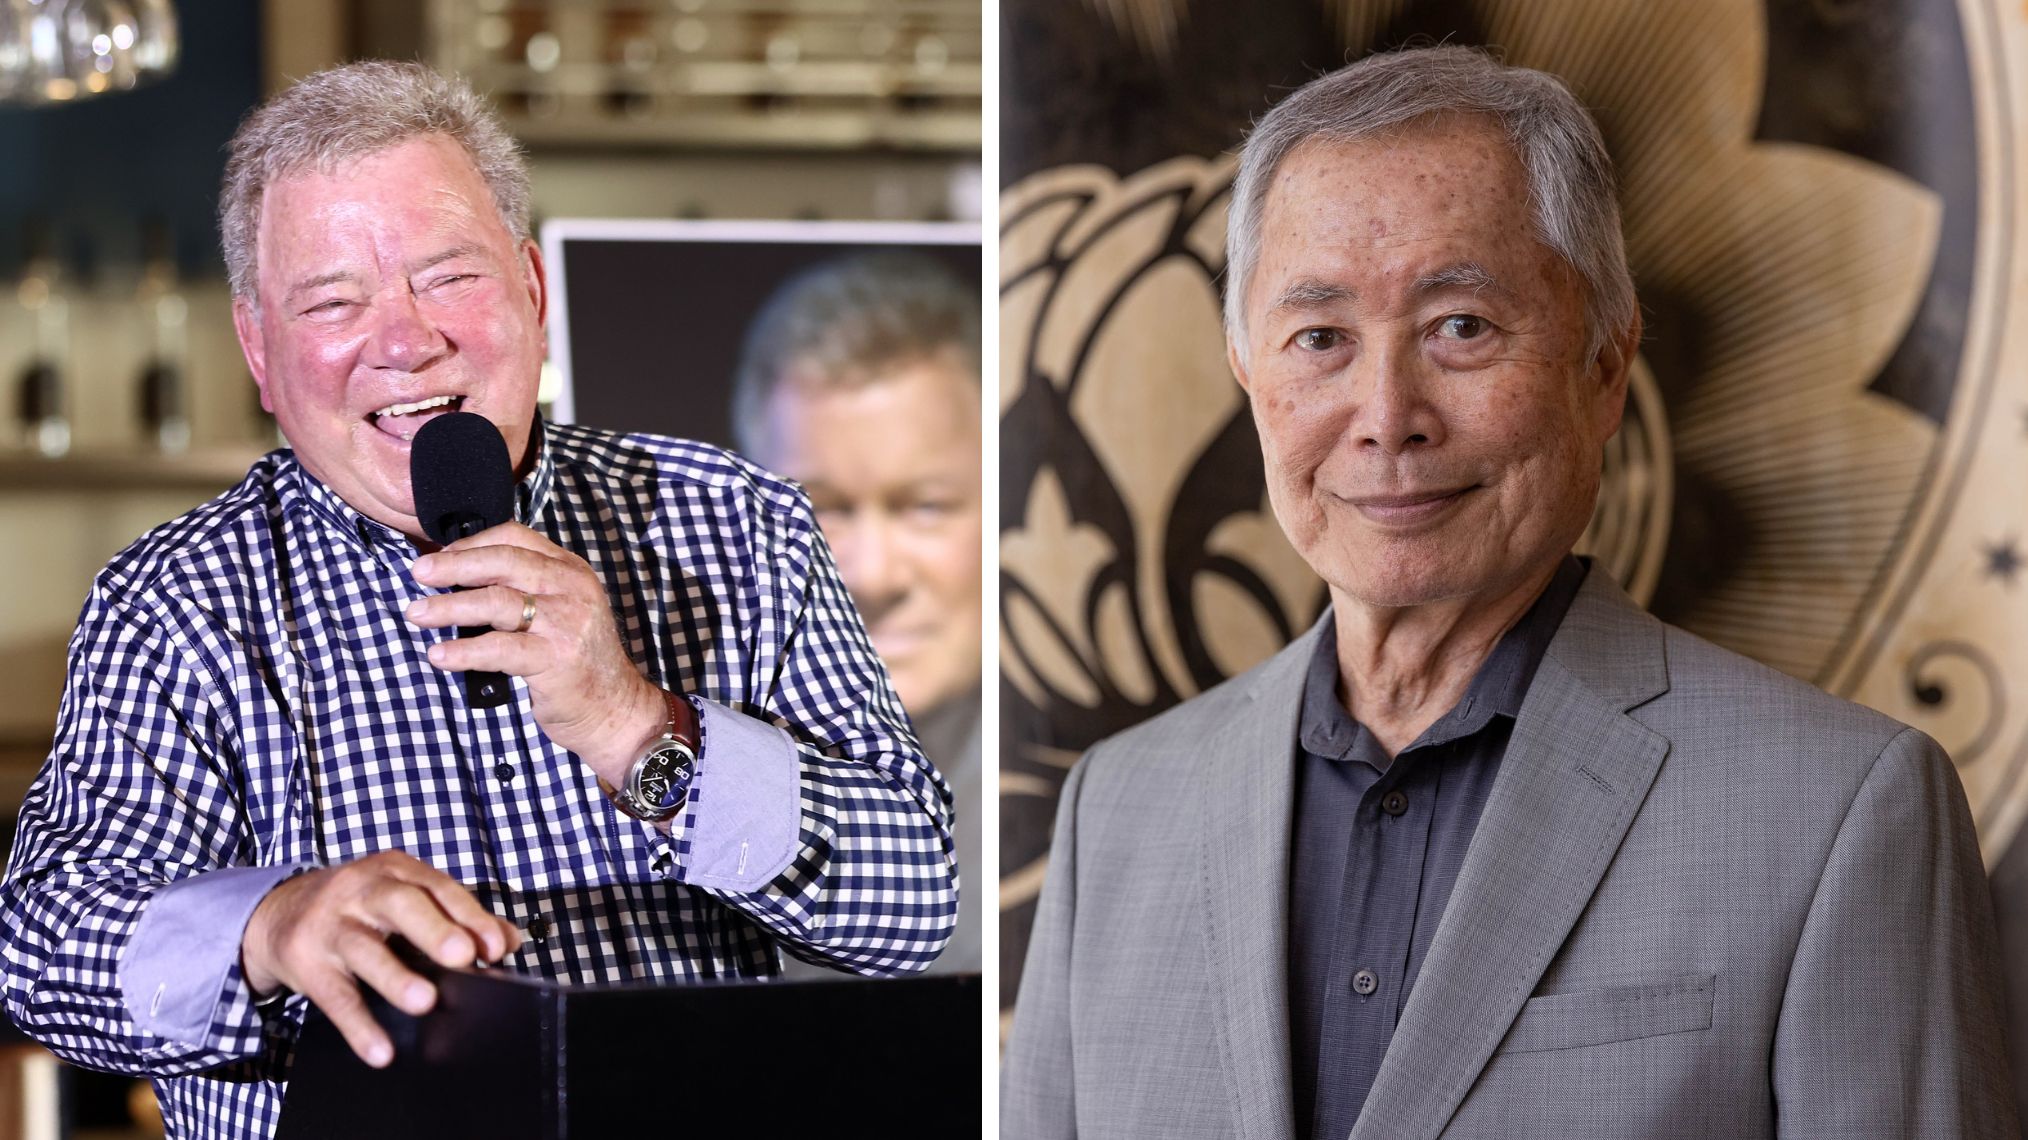 George Takei Brands William Shatner A Prima Donna In New Interview